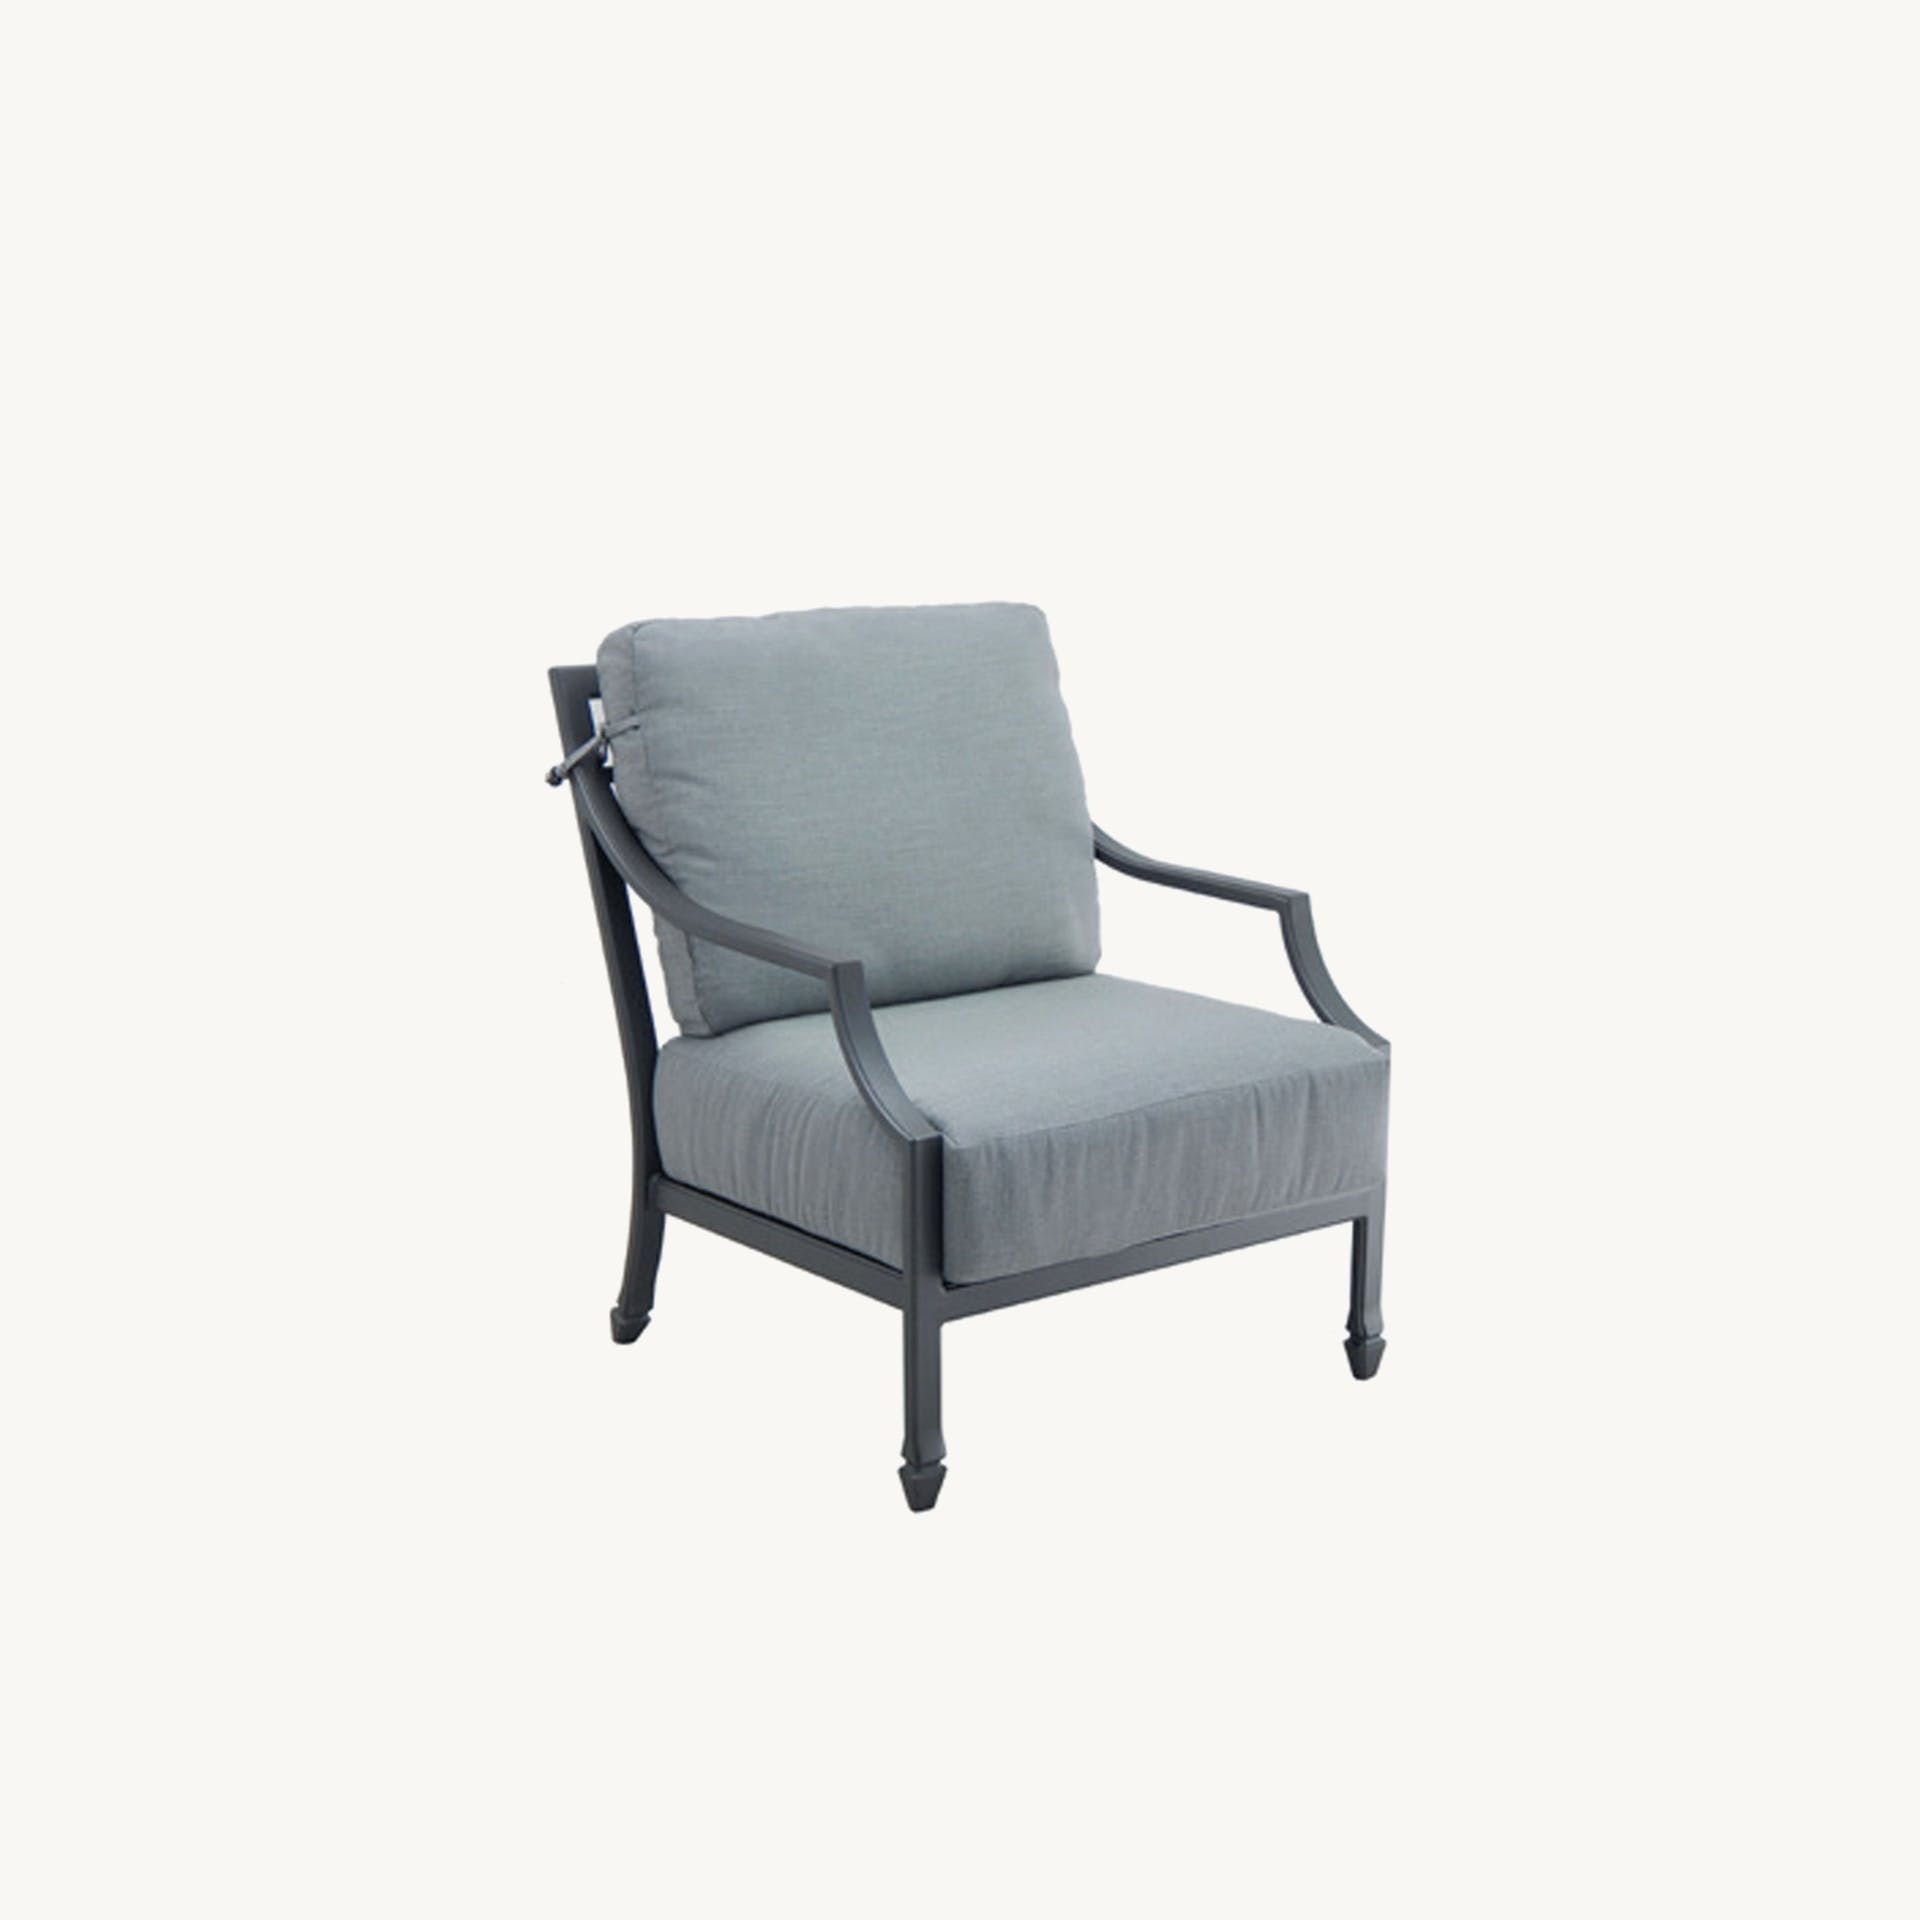 Lancaster Cushioned Lounge Chair By Castelle